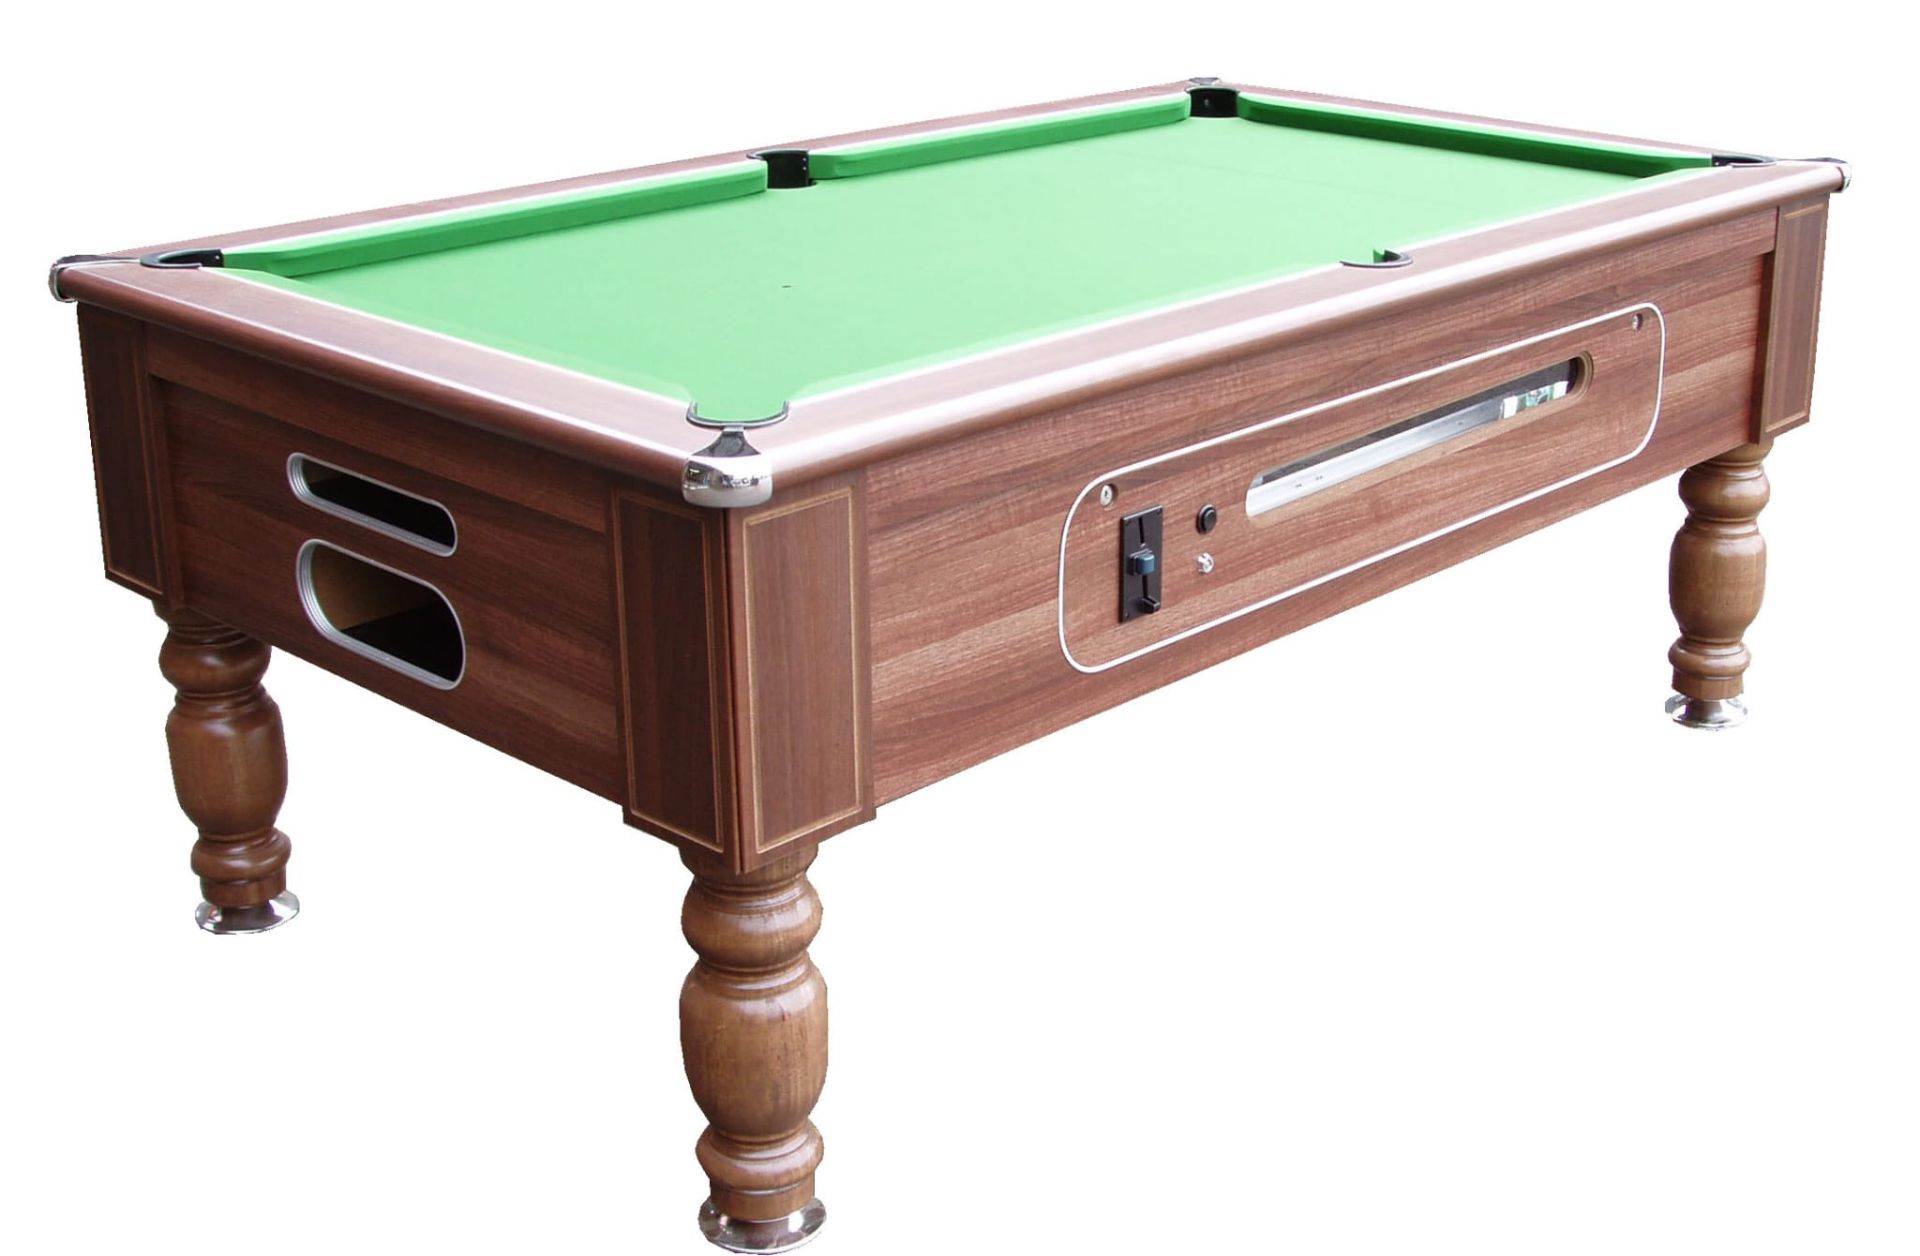 Barline pool table available in 7*4. Coin-operated and free play. Choice of cloth colors. - Image 4 of 4